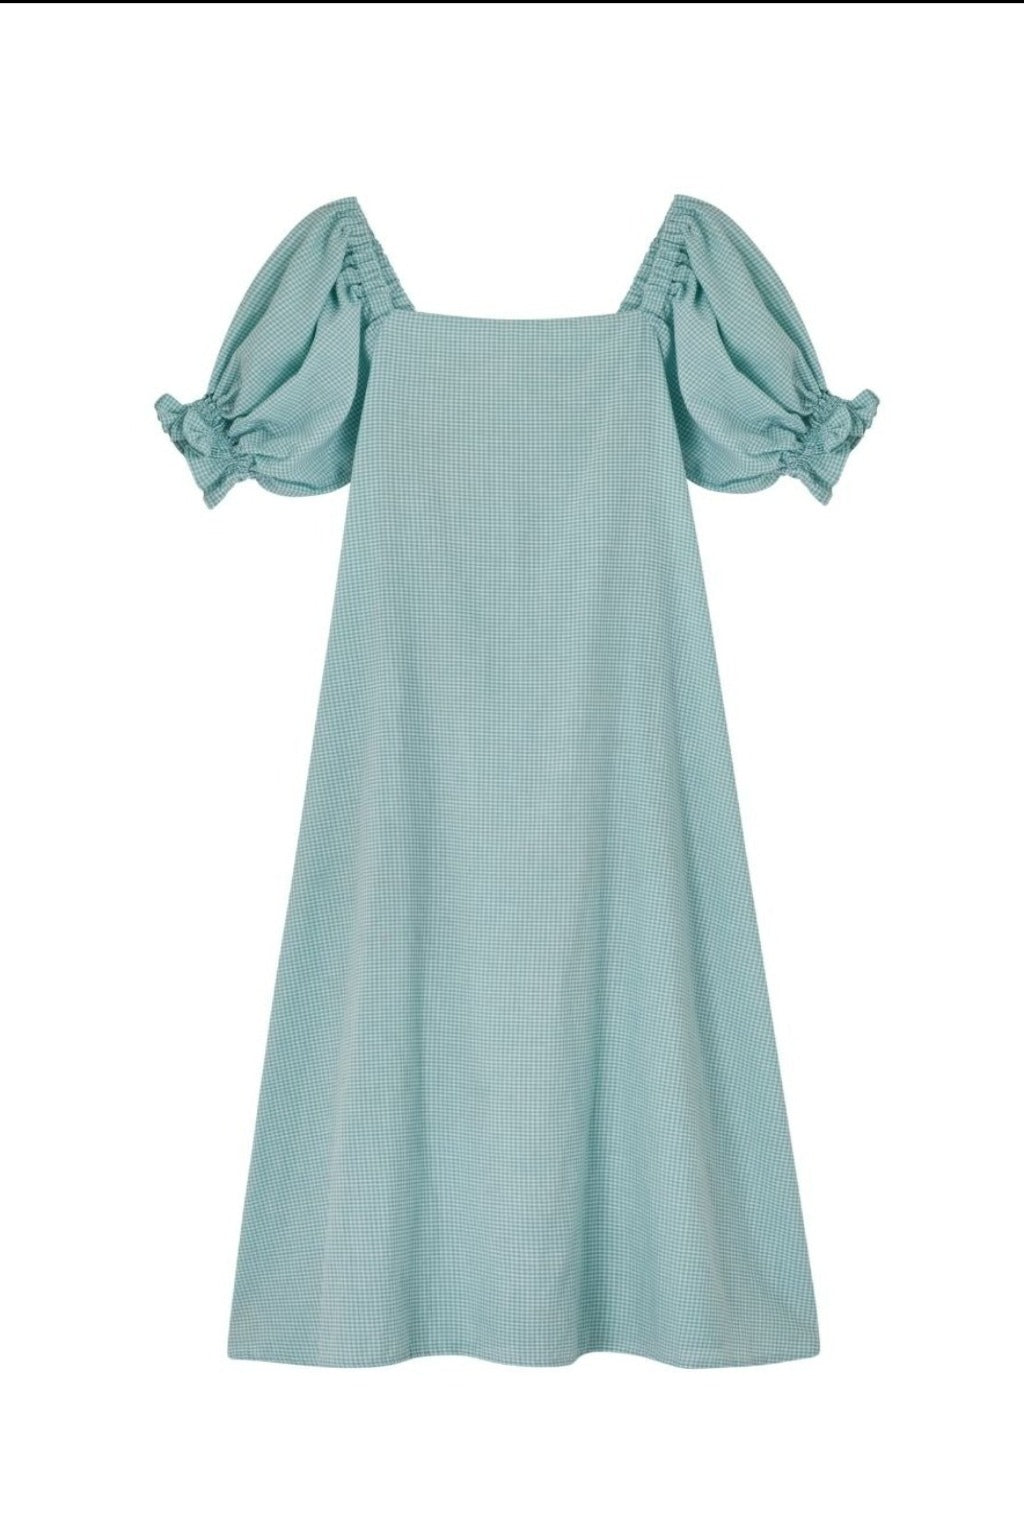 Madera Dress in Mint Gingham